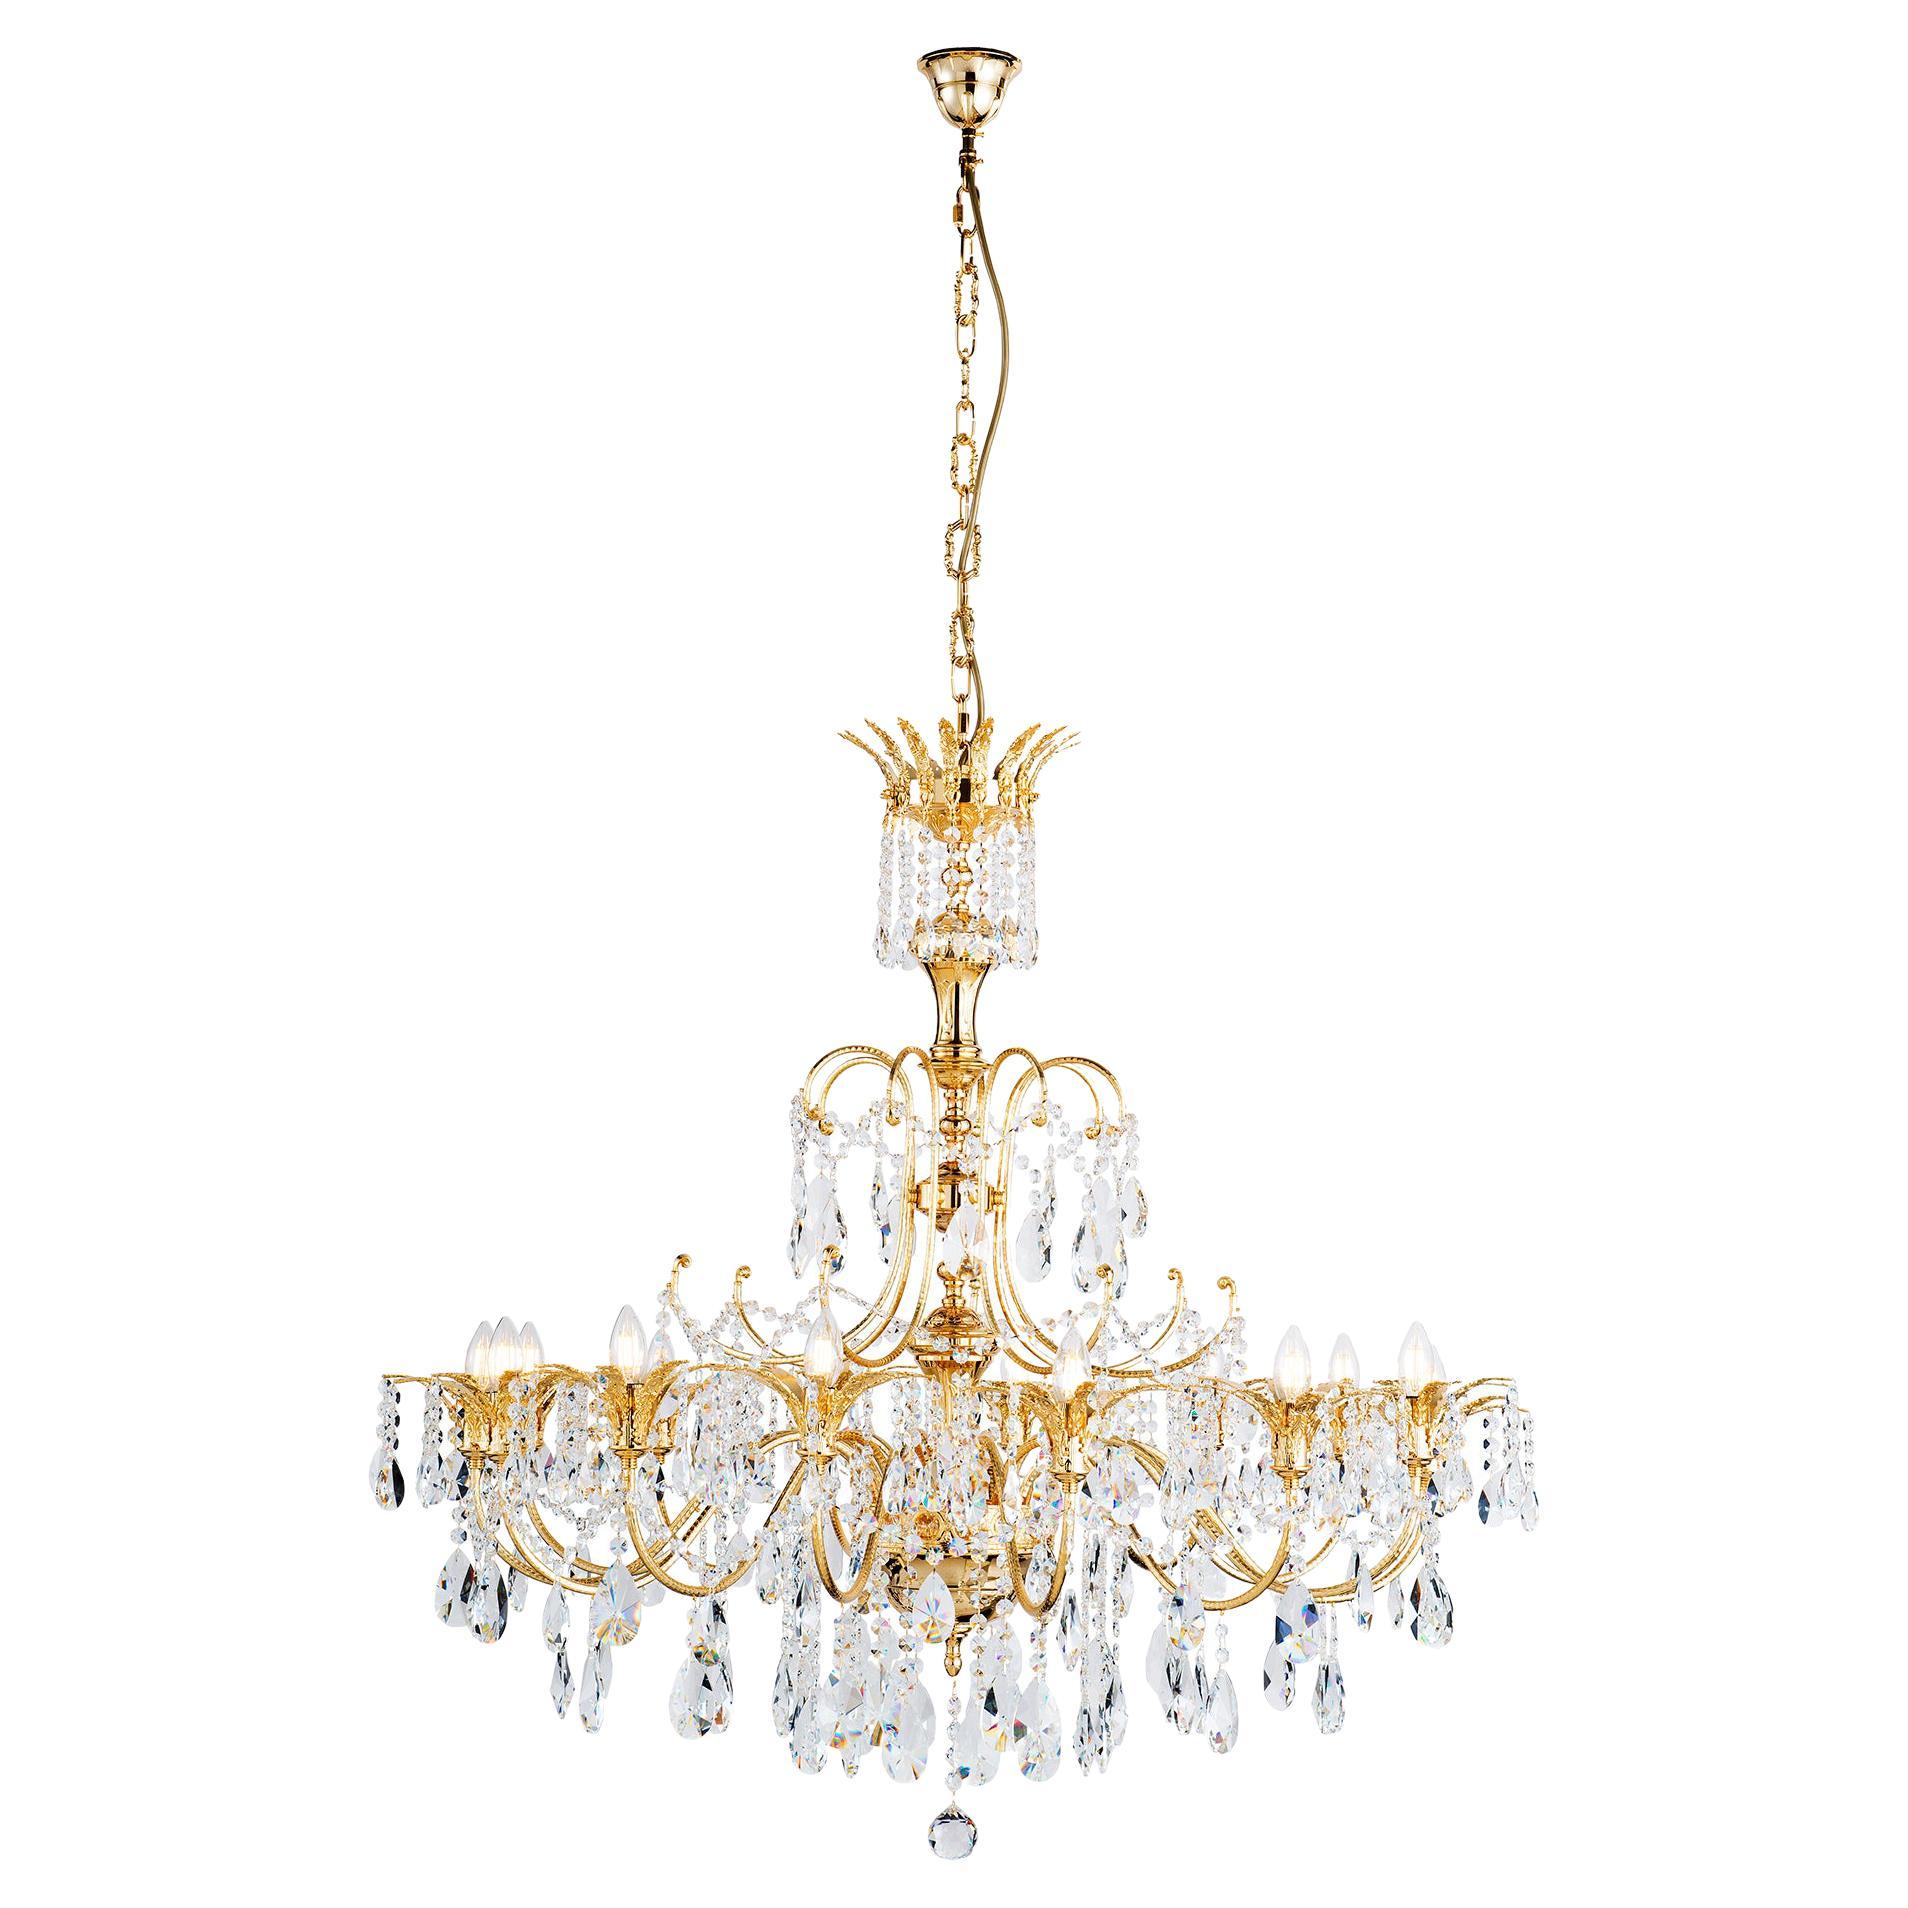 14 Lights Chandelier in 24kt Gold Plated Finish and Crystal Pendants For Sale